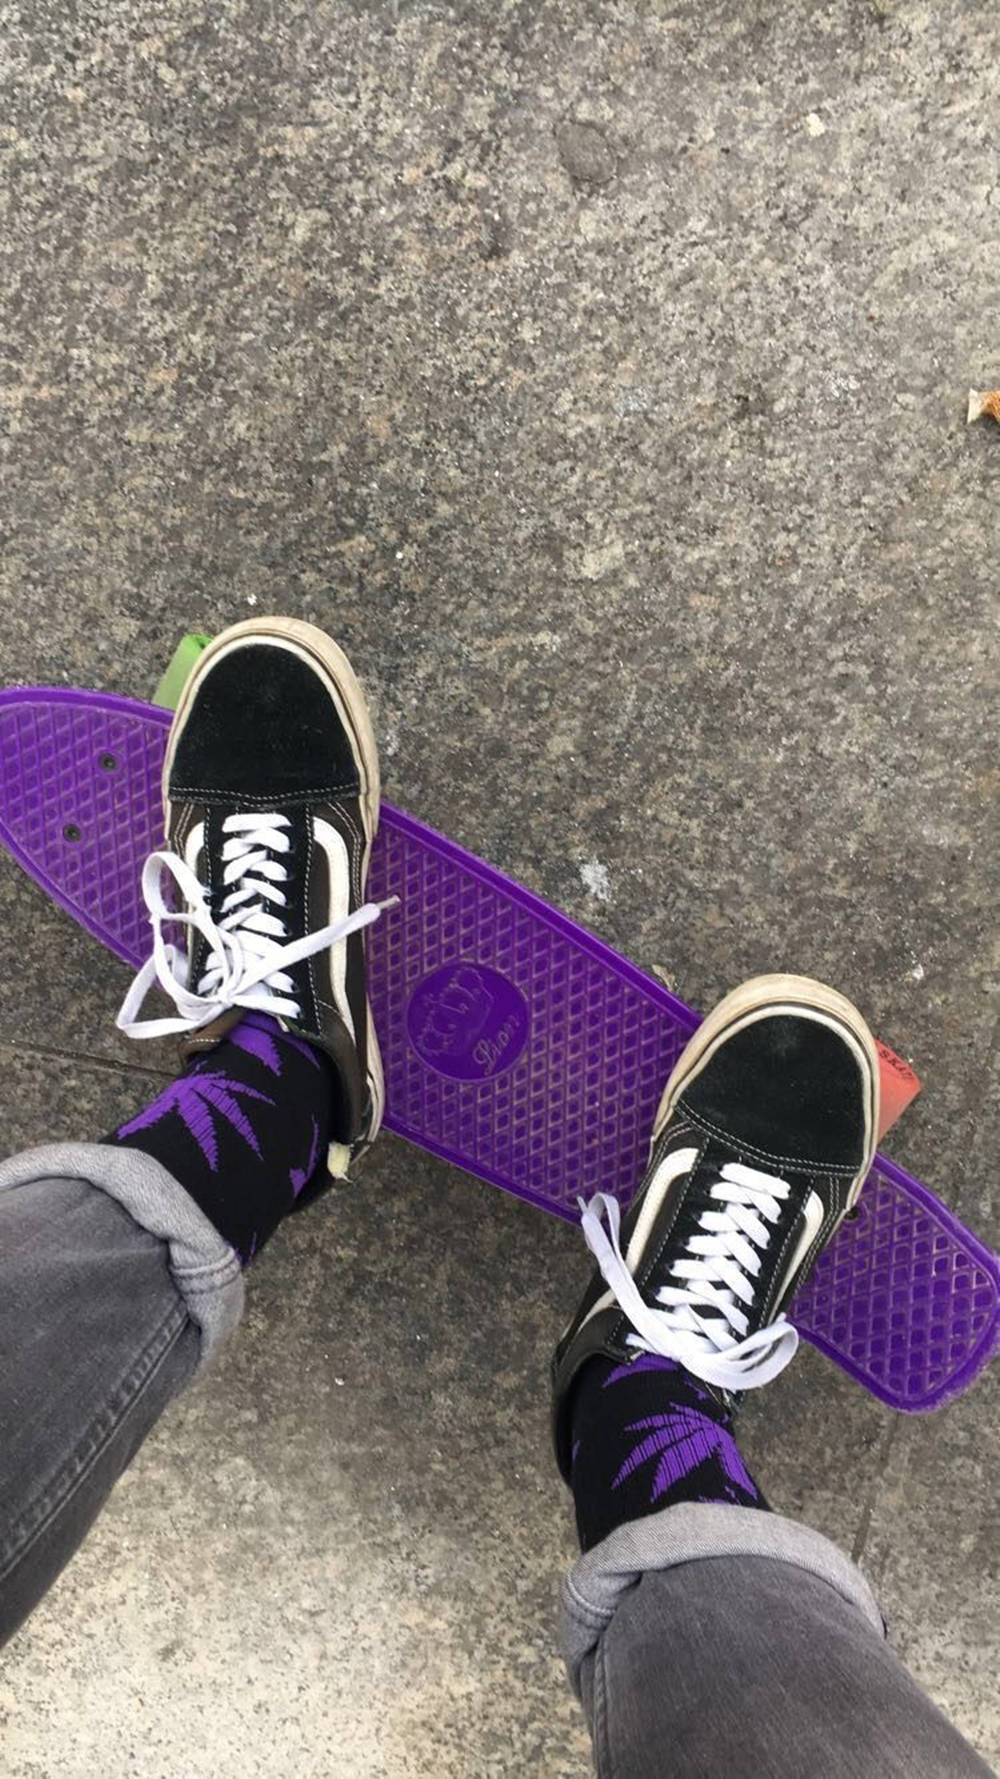 A reviewer's feet on a penny board - Skate